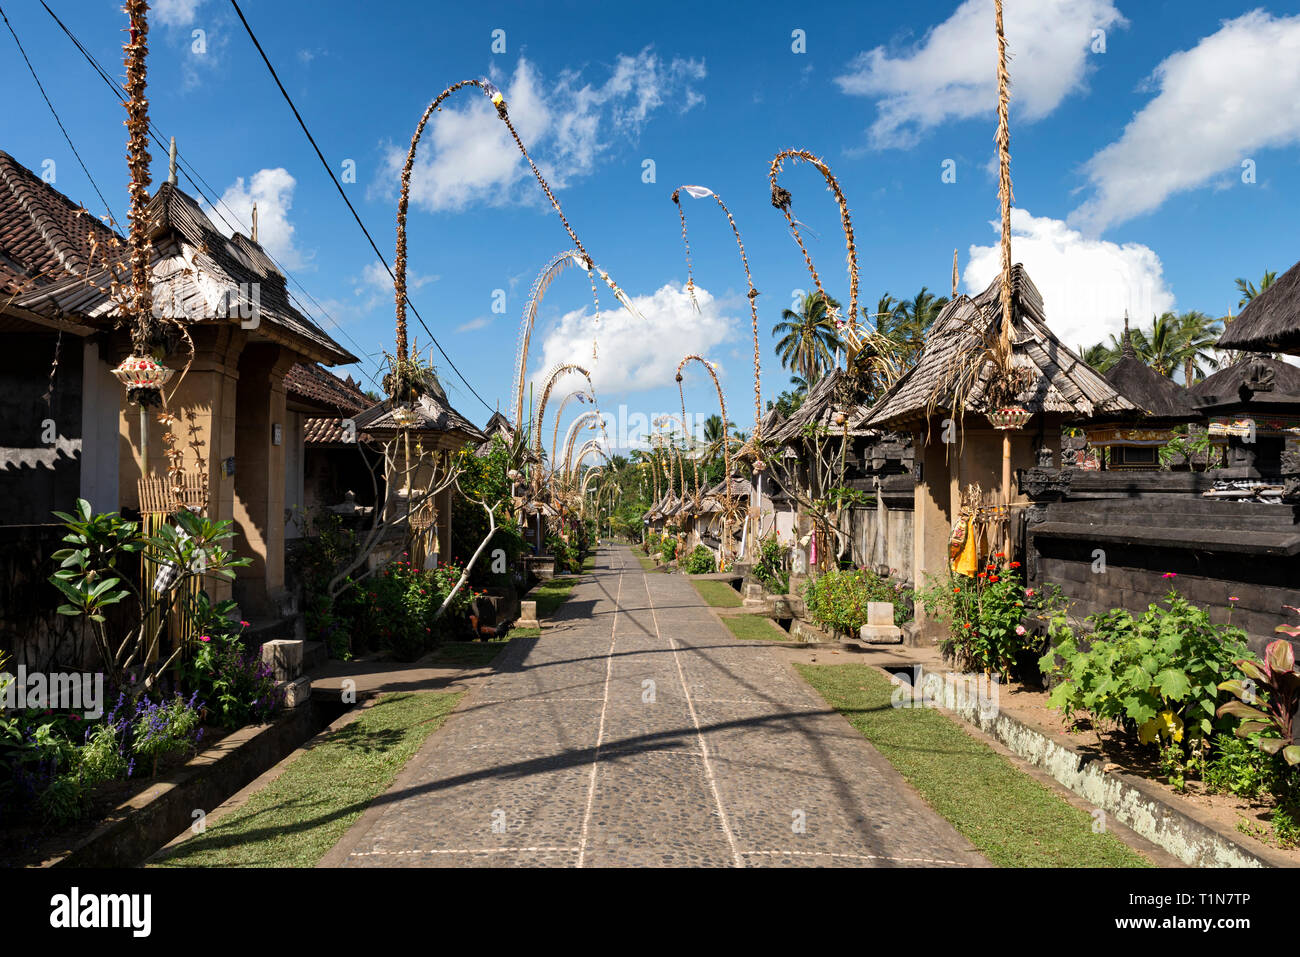 Penglipuran Village decorated with penjor (curved poles with offerings to celebrate Galungan - the victory of good over evil) Stock Photo